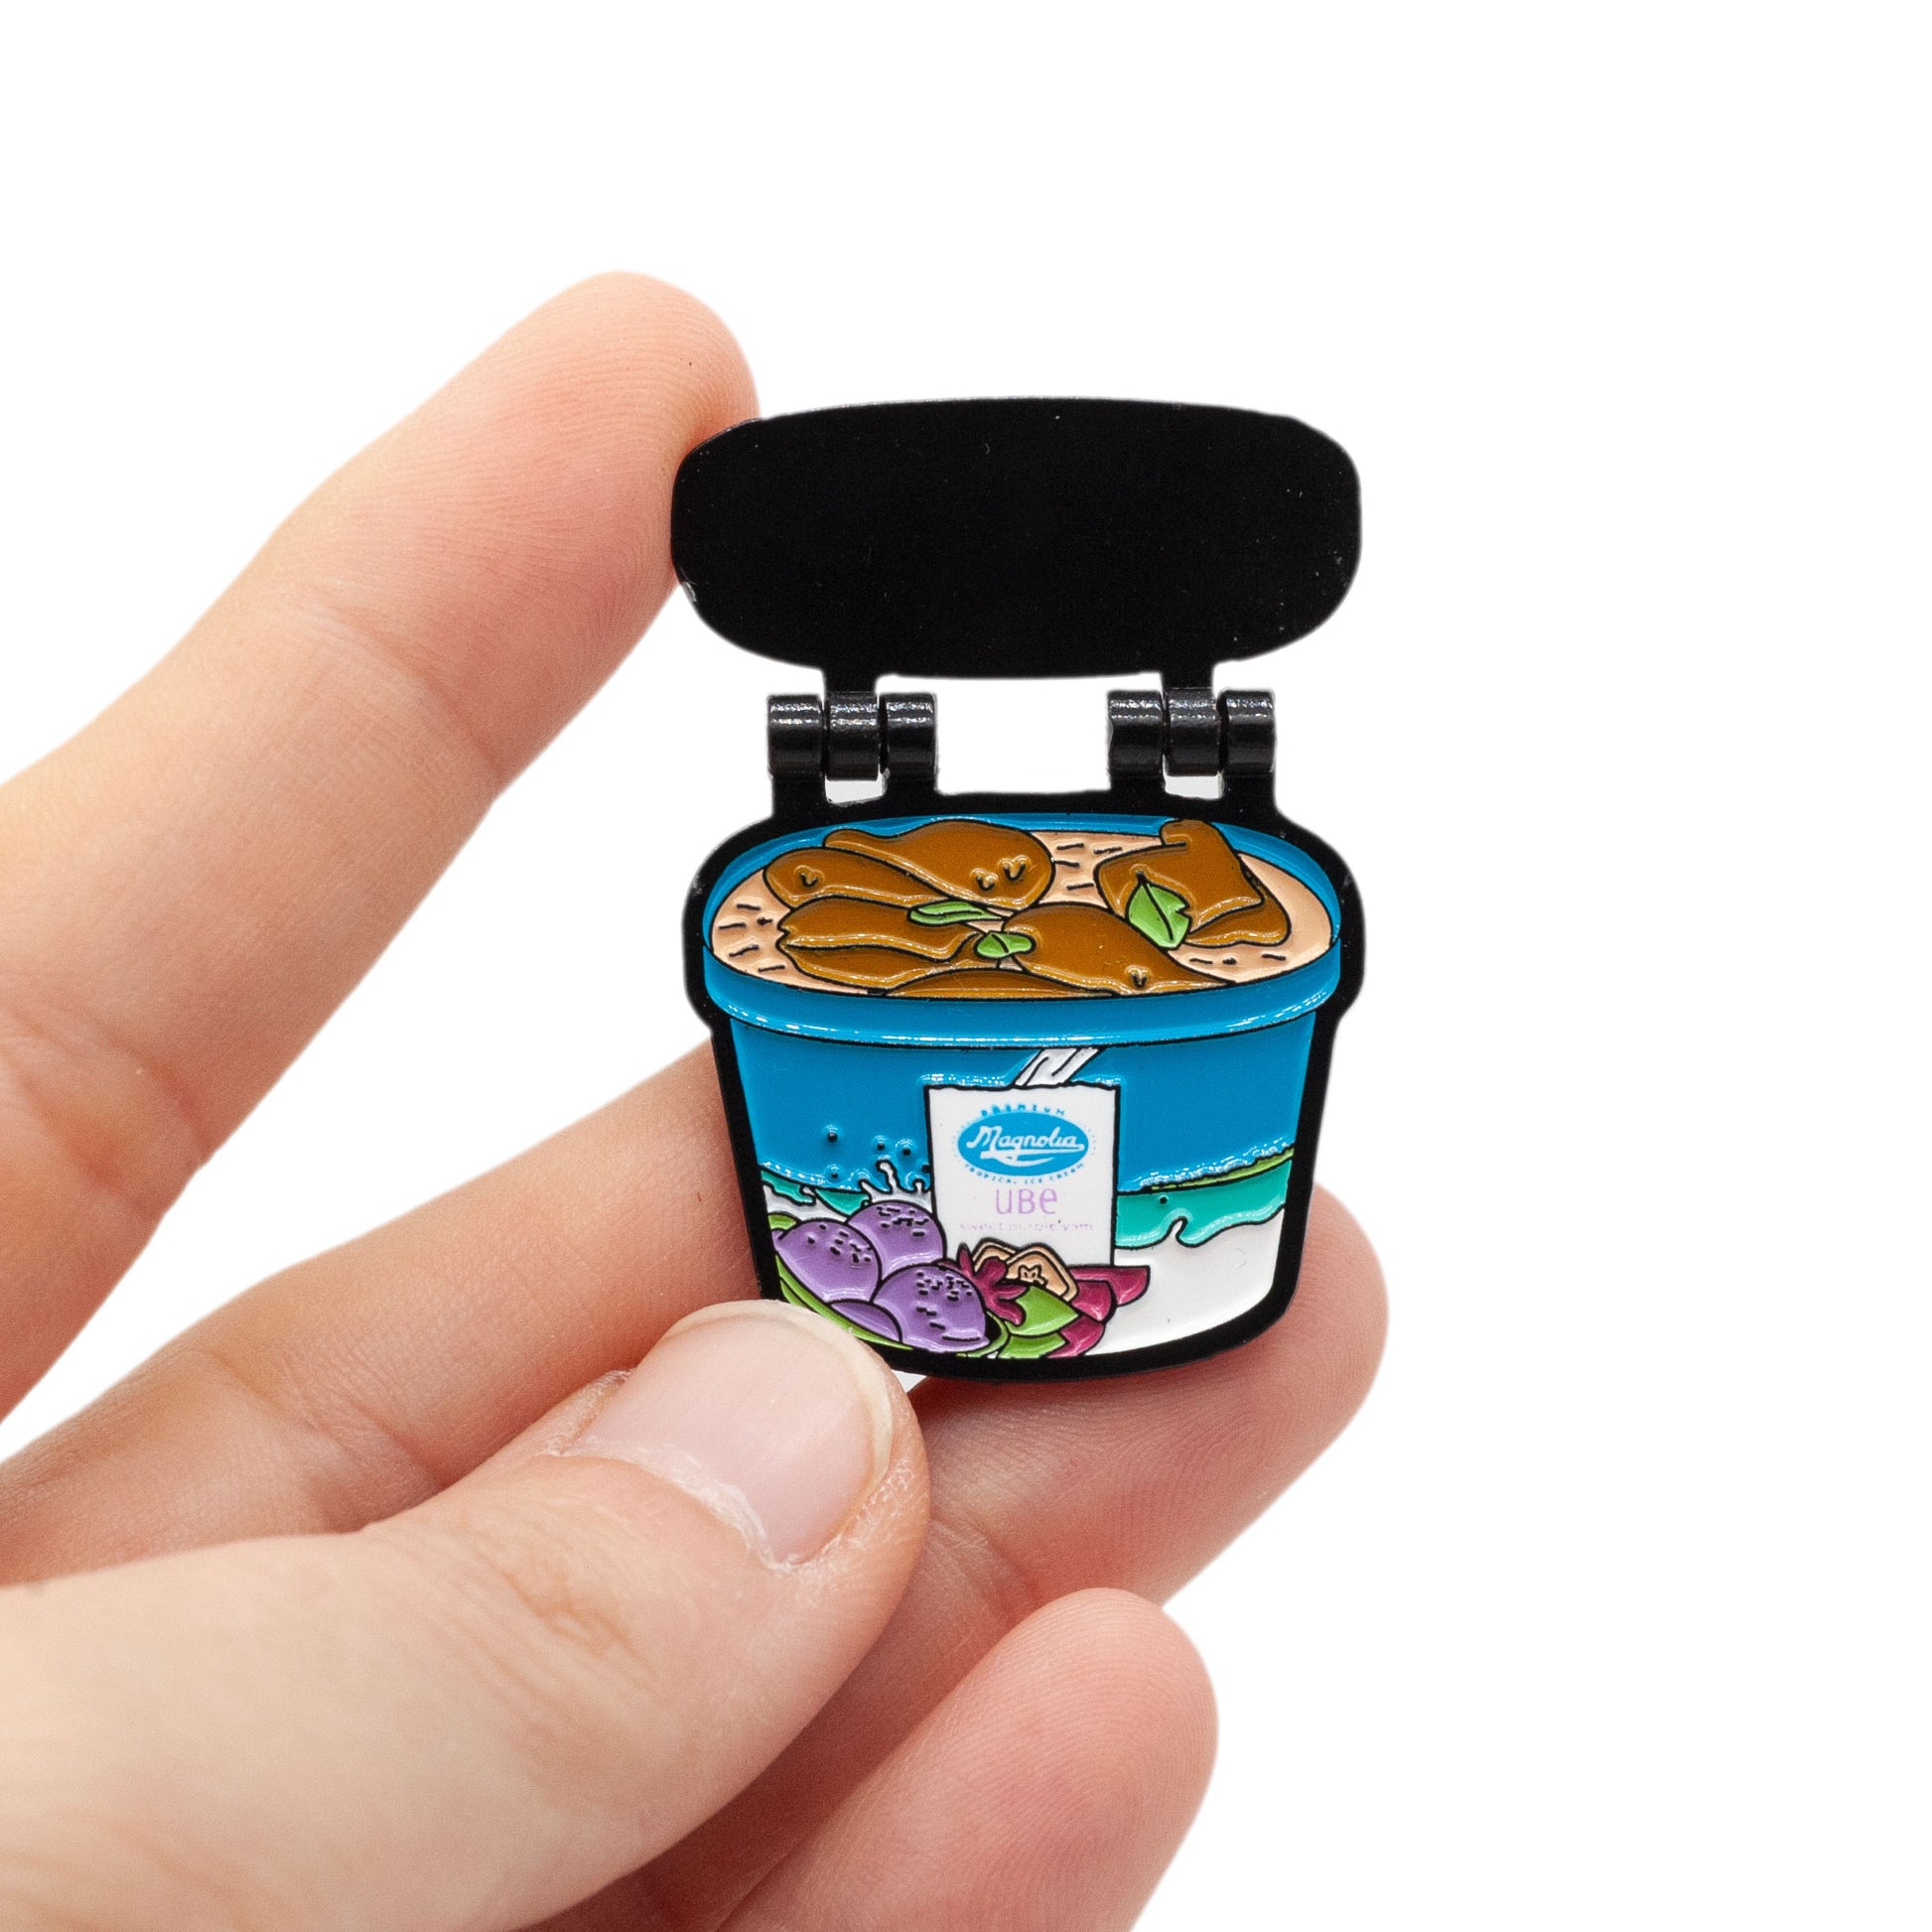 magnolia ice cream tub enamel pin that hinges open to reveal frozen chicken adobo. The ultimate Filipino Tupperware! Pin is held by a hand over a white background.